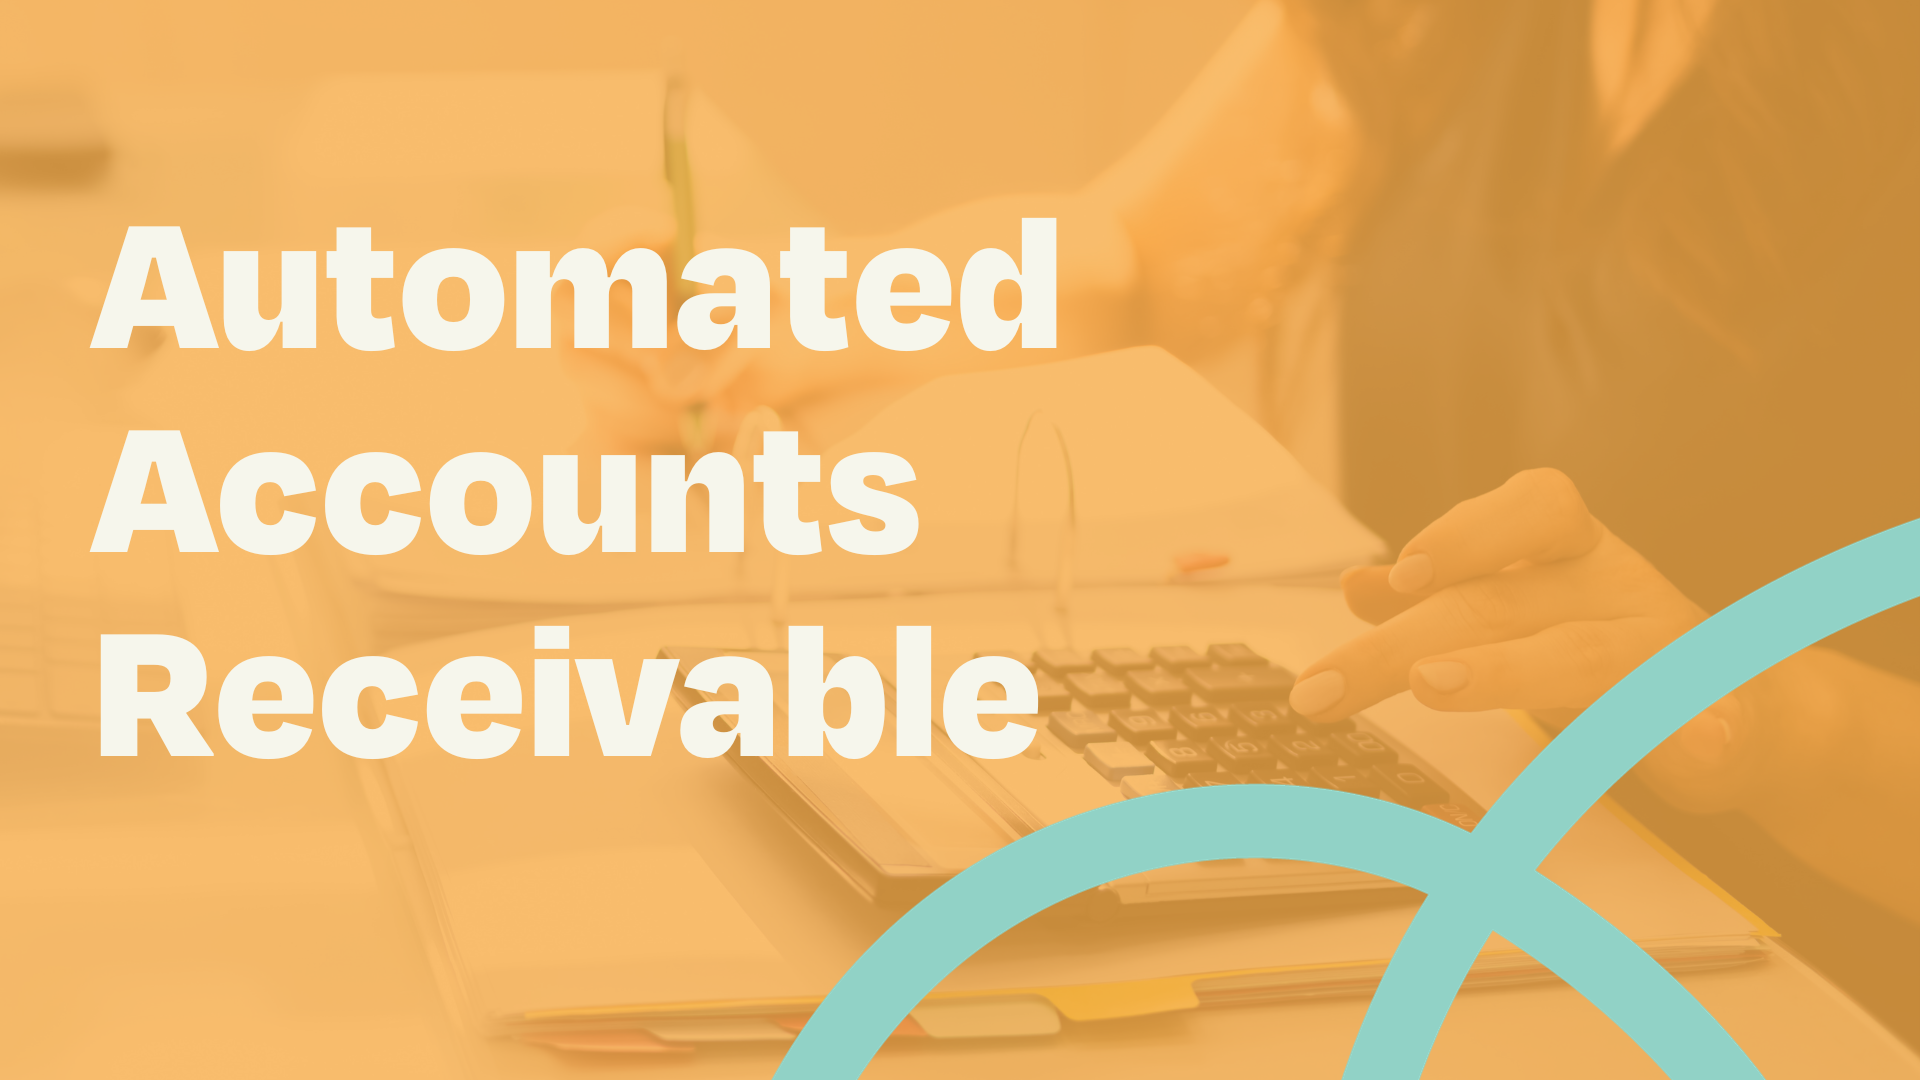 Automate Accounts Receivable For Increased Productivity | Accounting Prose